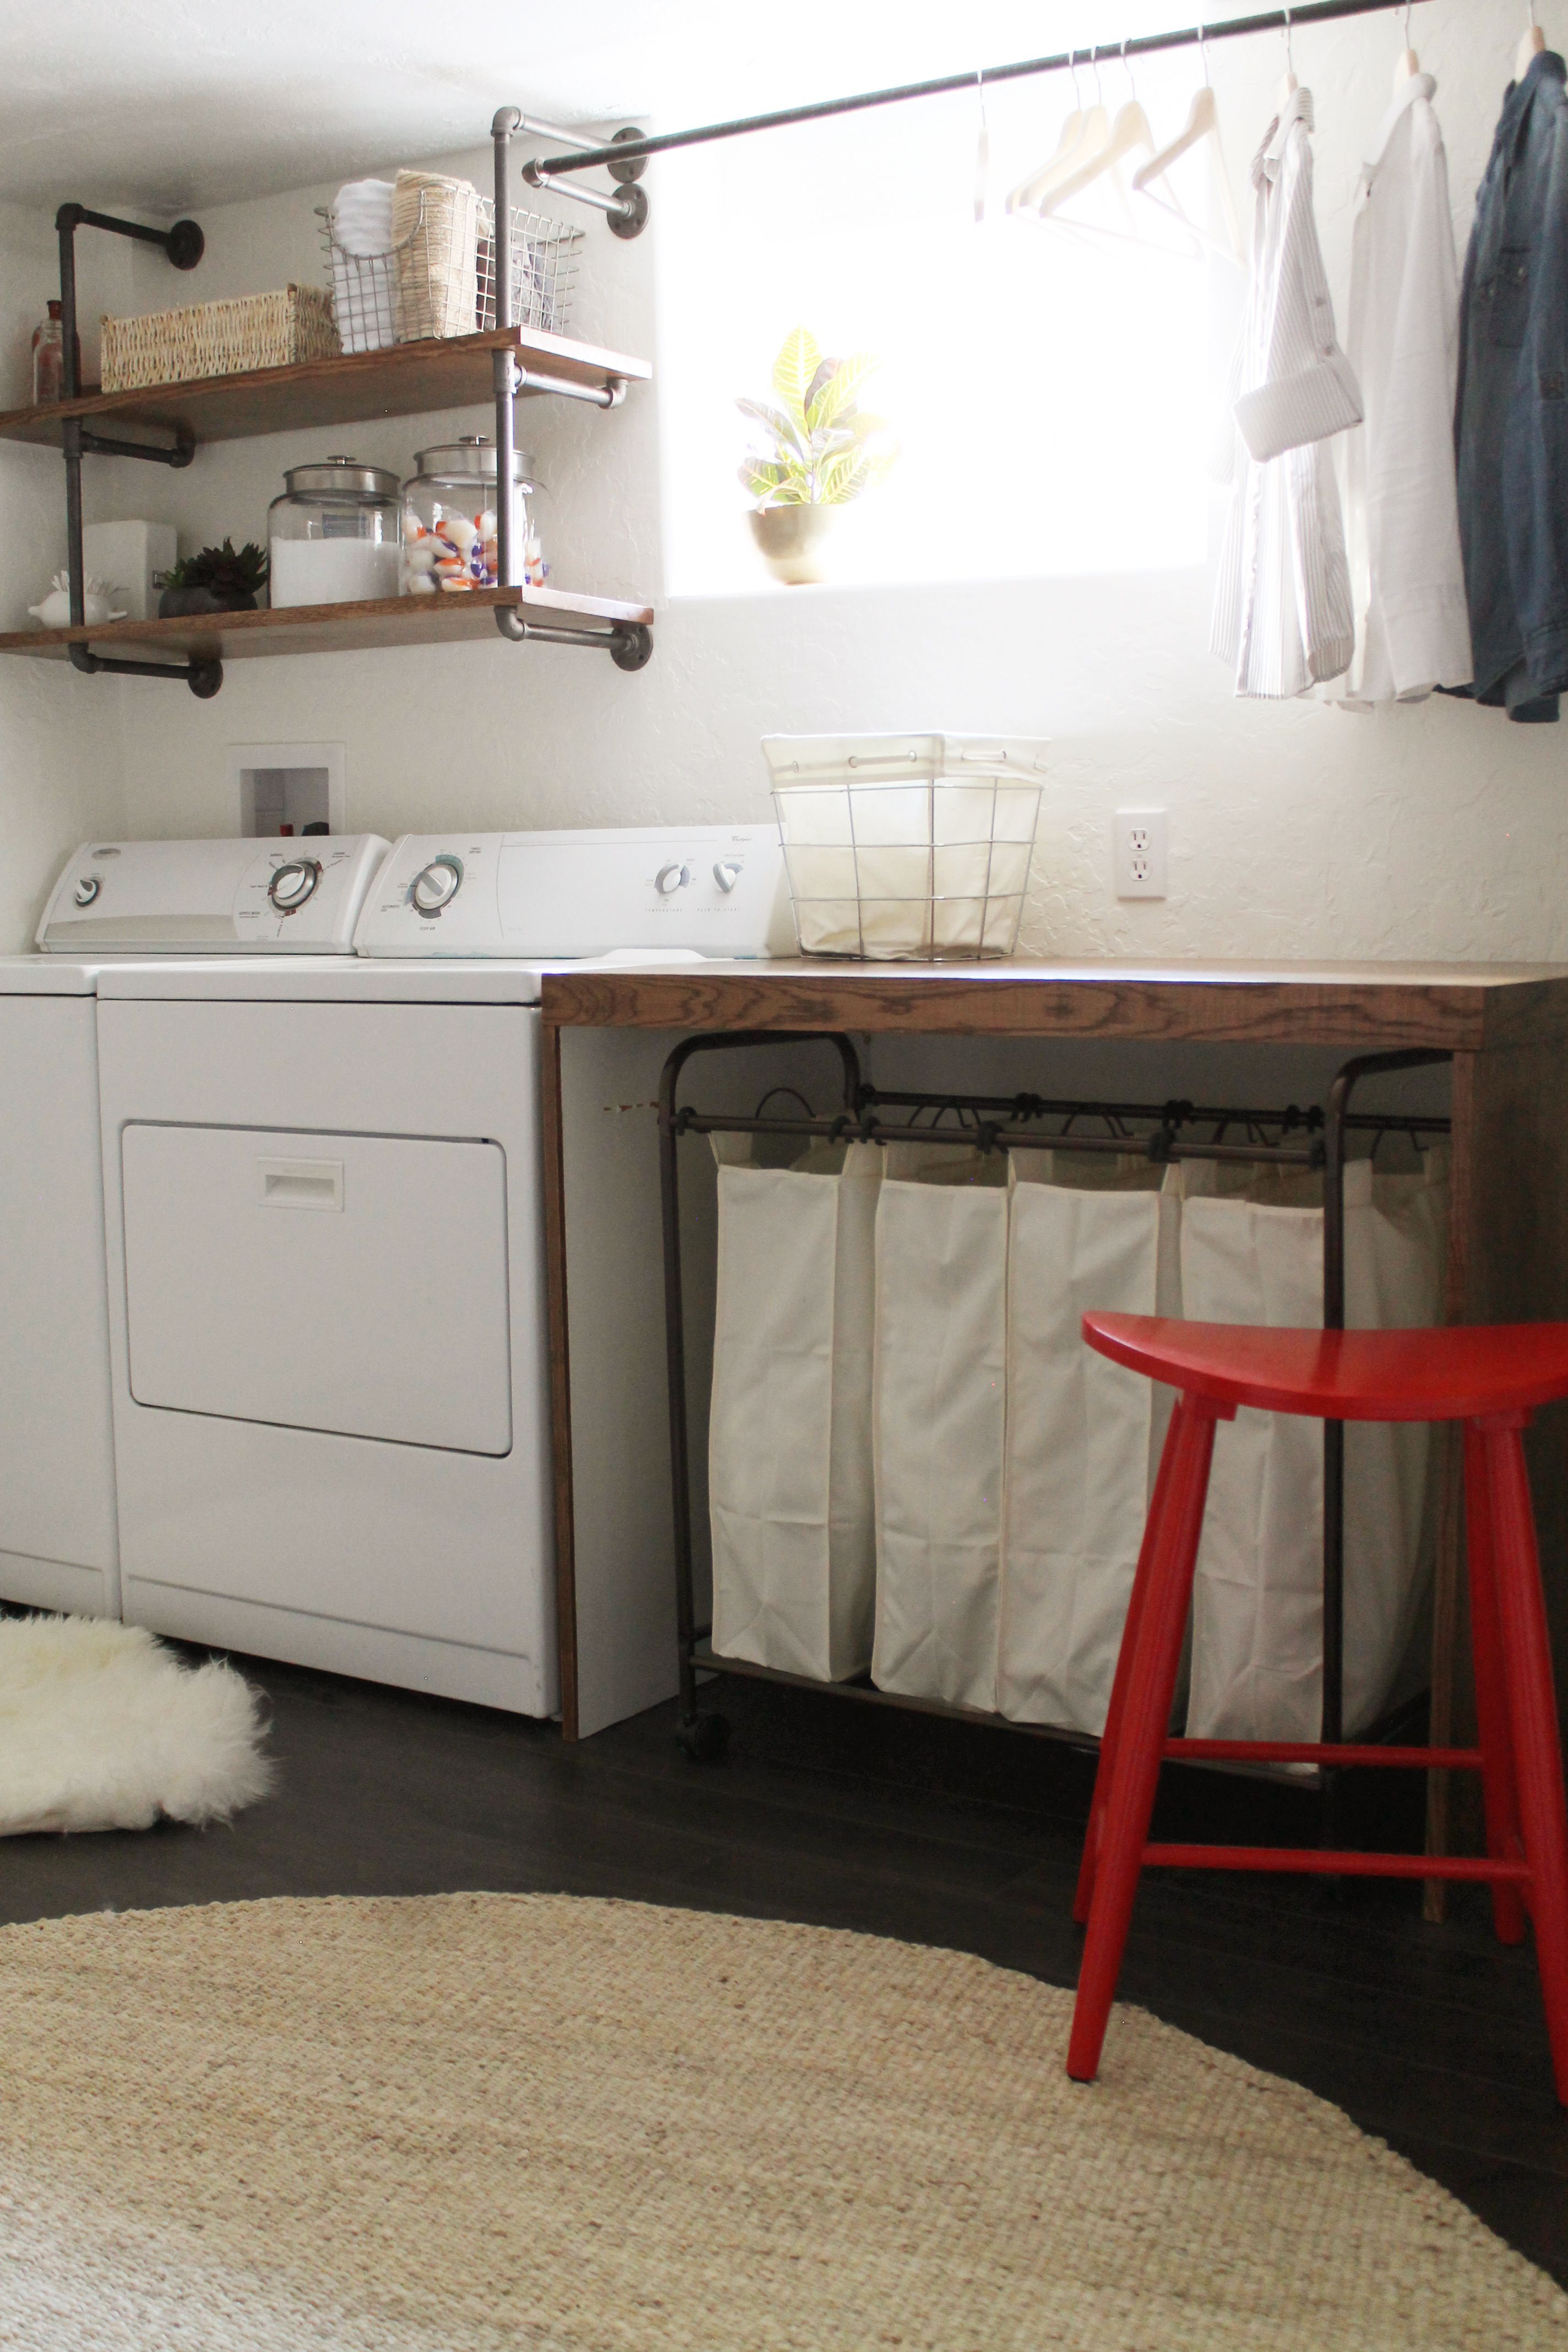 basement laundry room — I like the simplicity of this room, the wooden folding table, the shelves ove